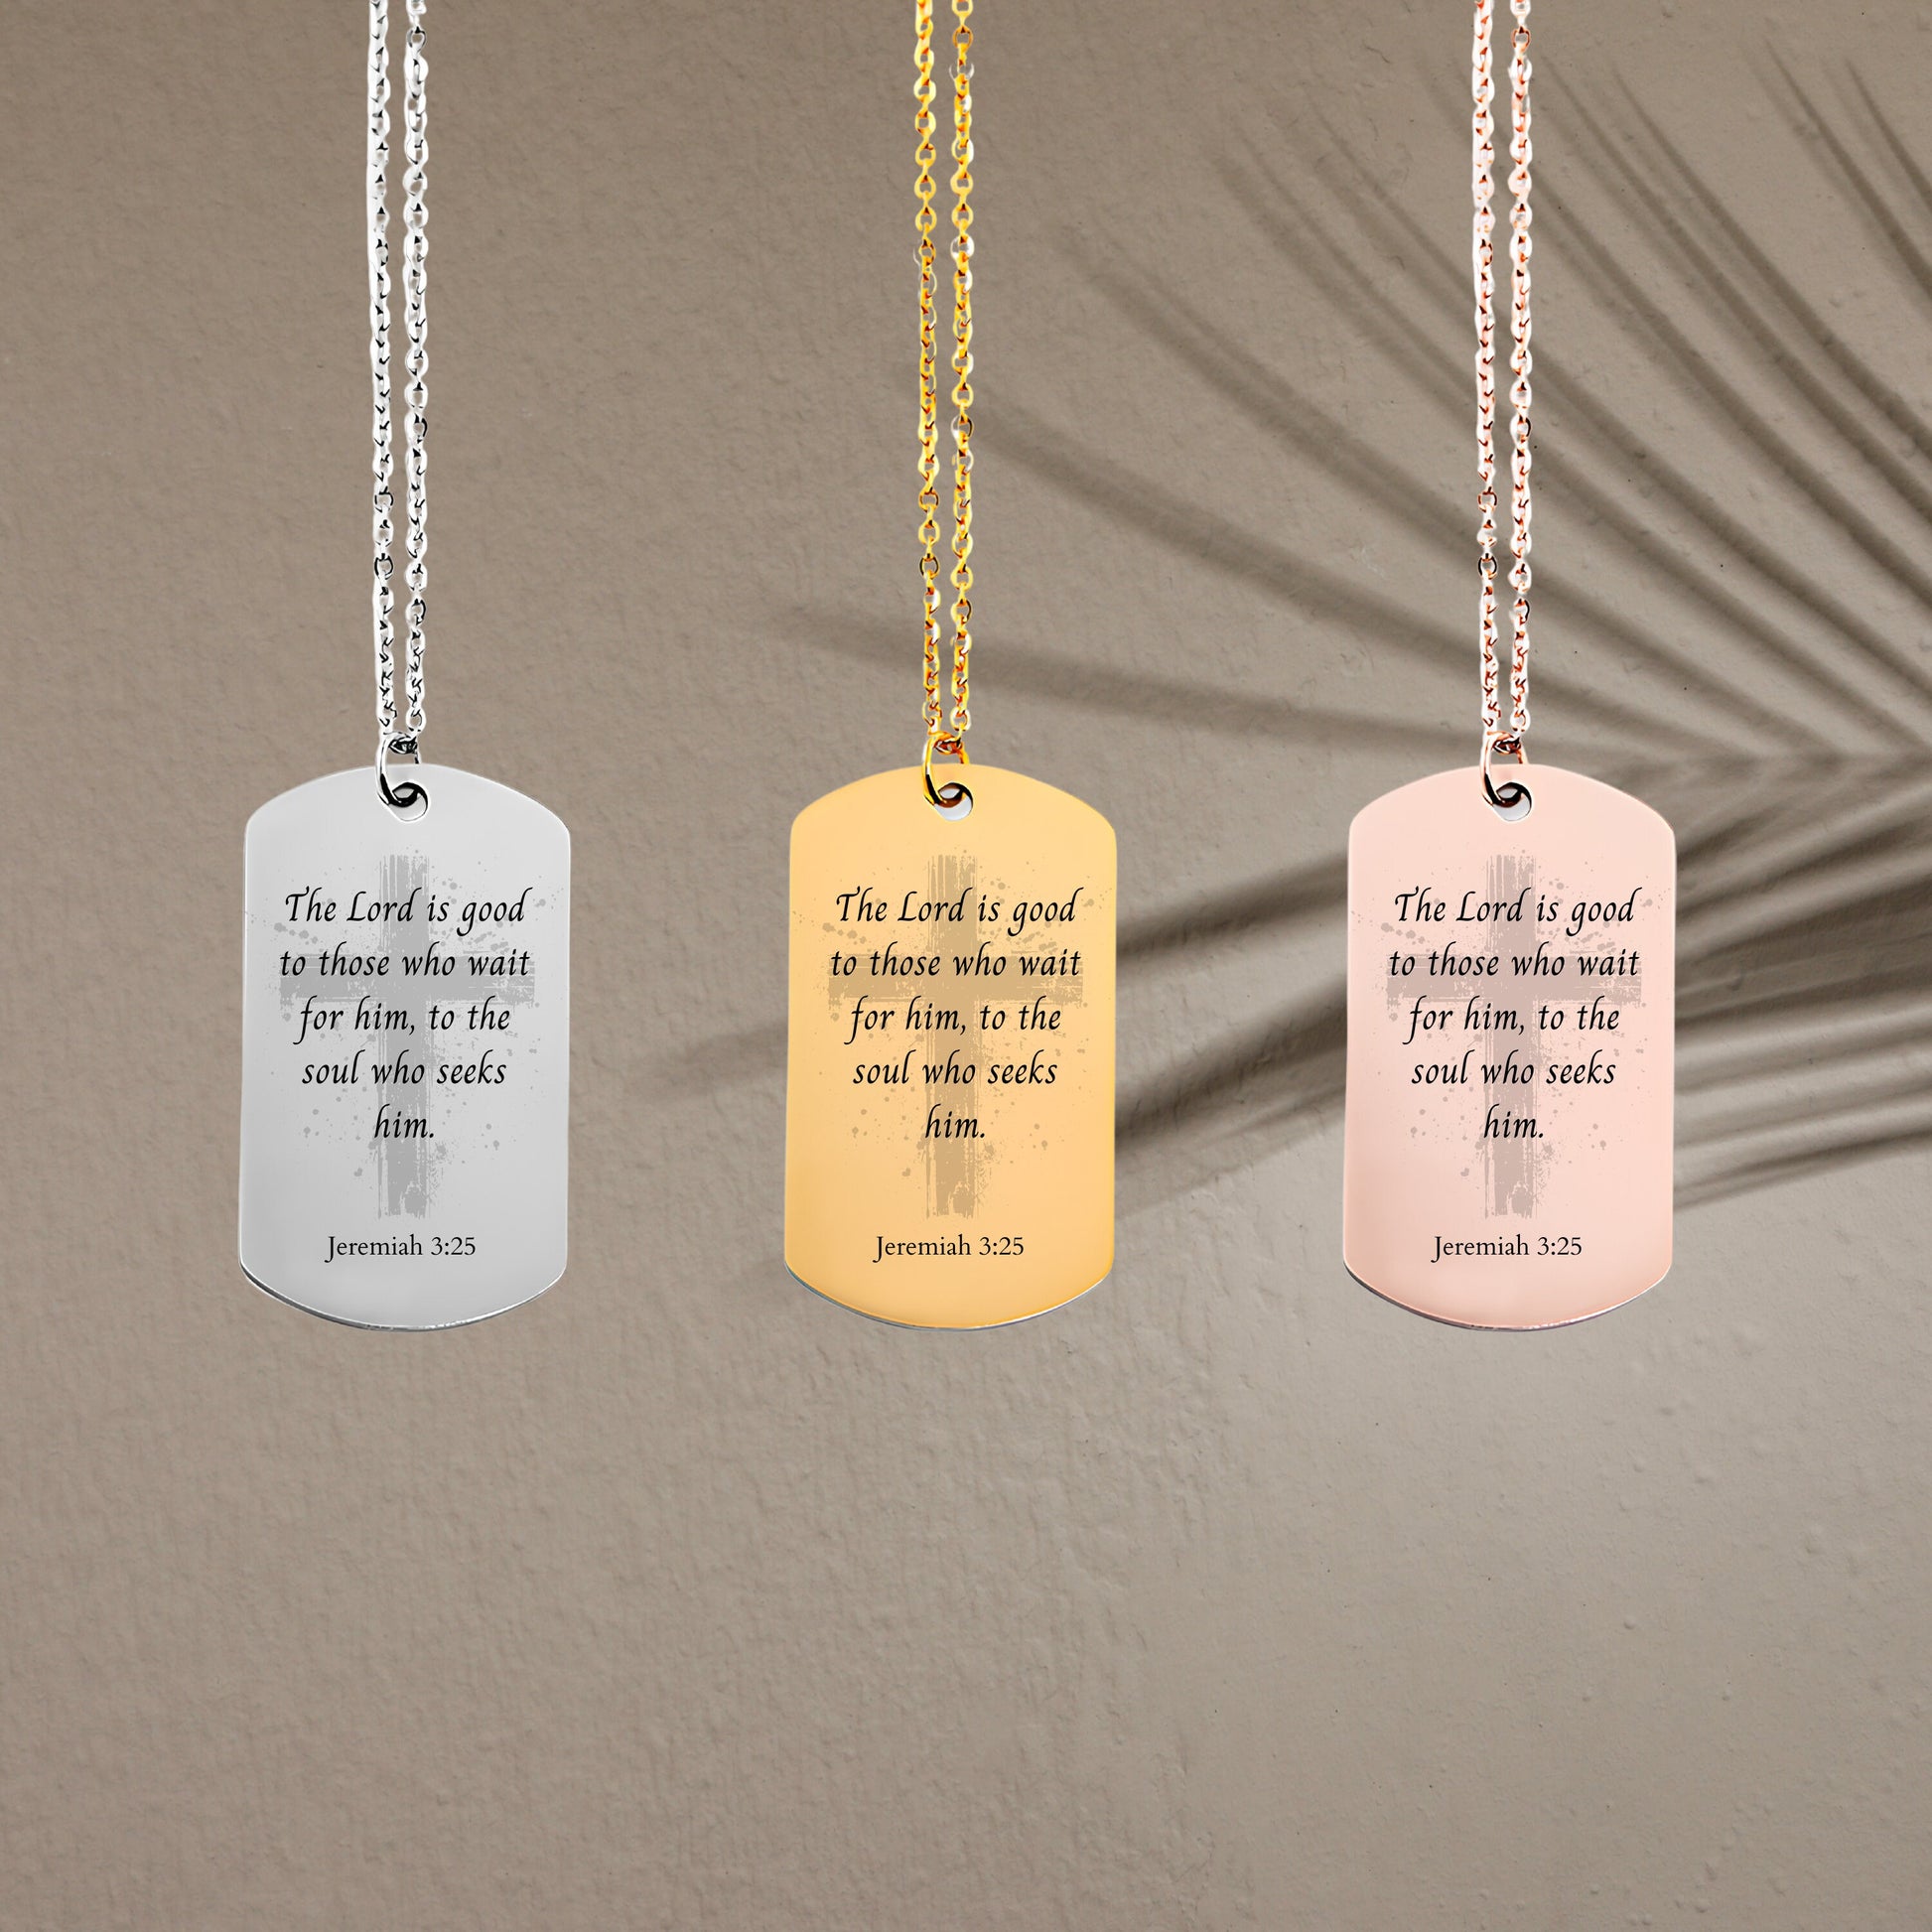 Jeremiah 3 25 quote necklace - Personalizable Jewelry